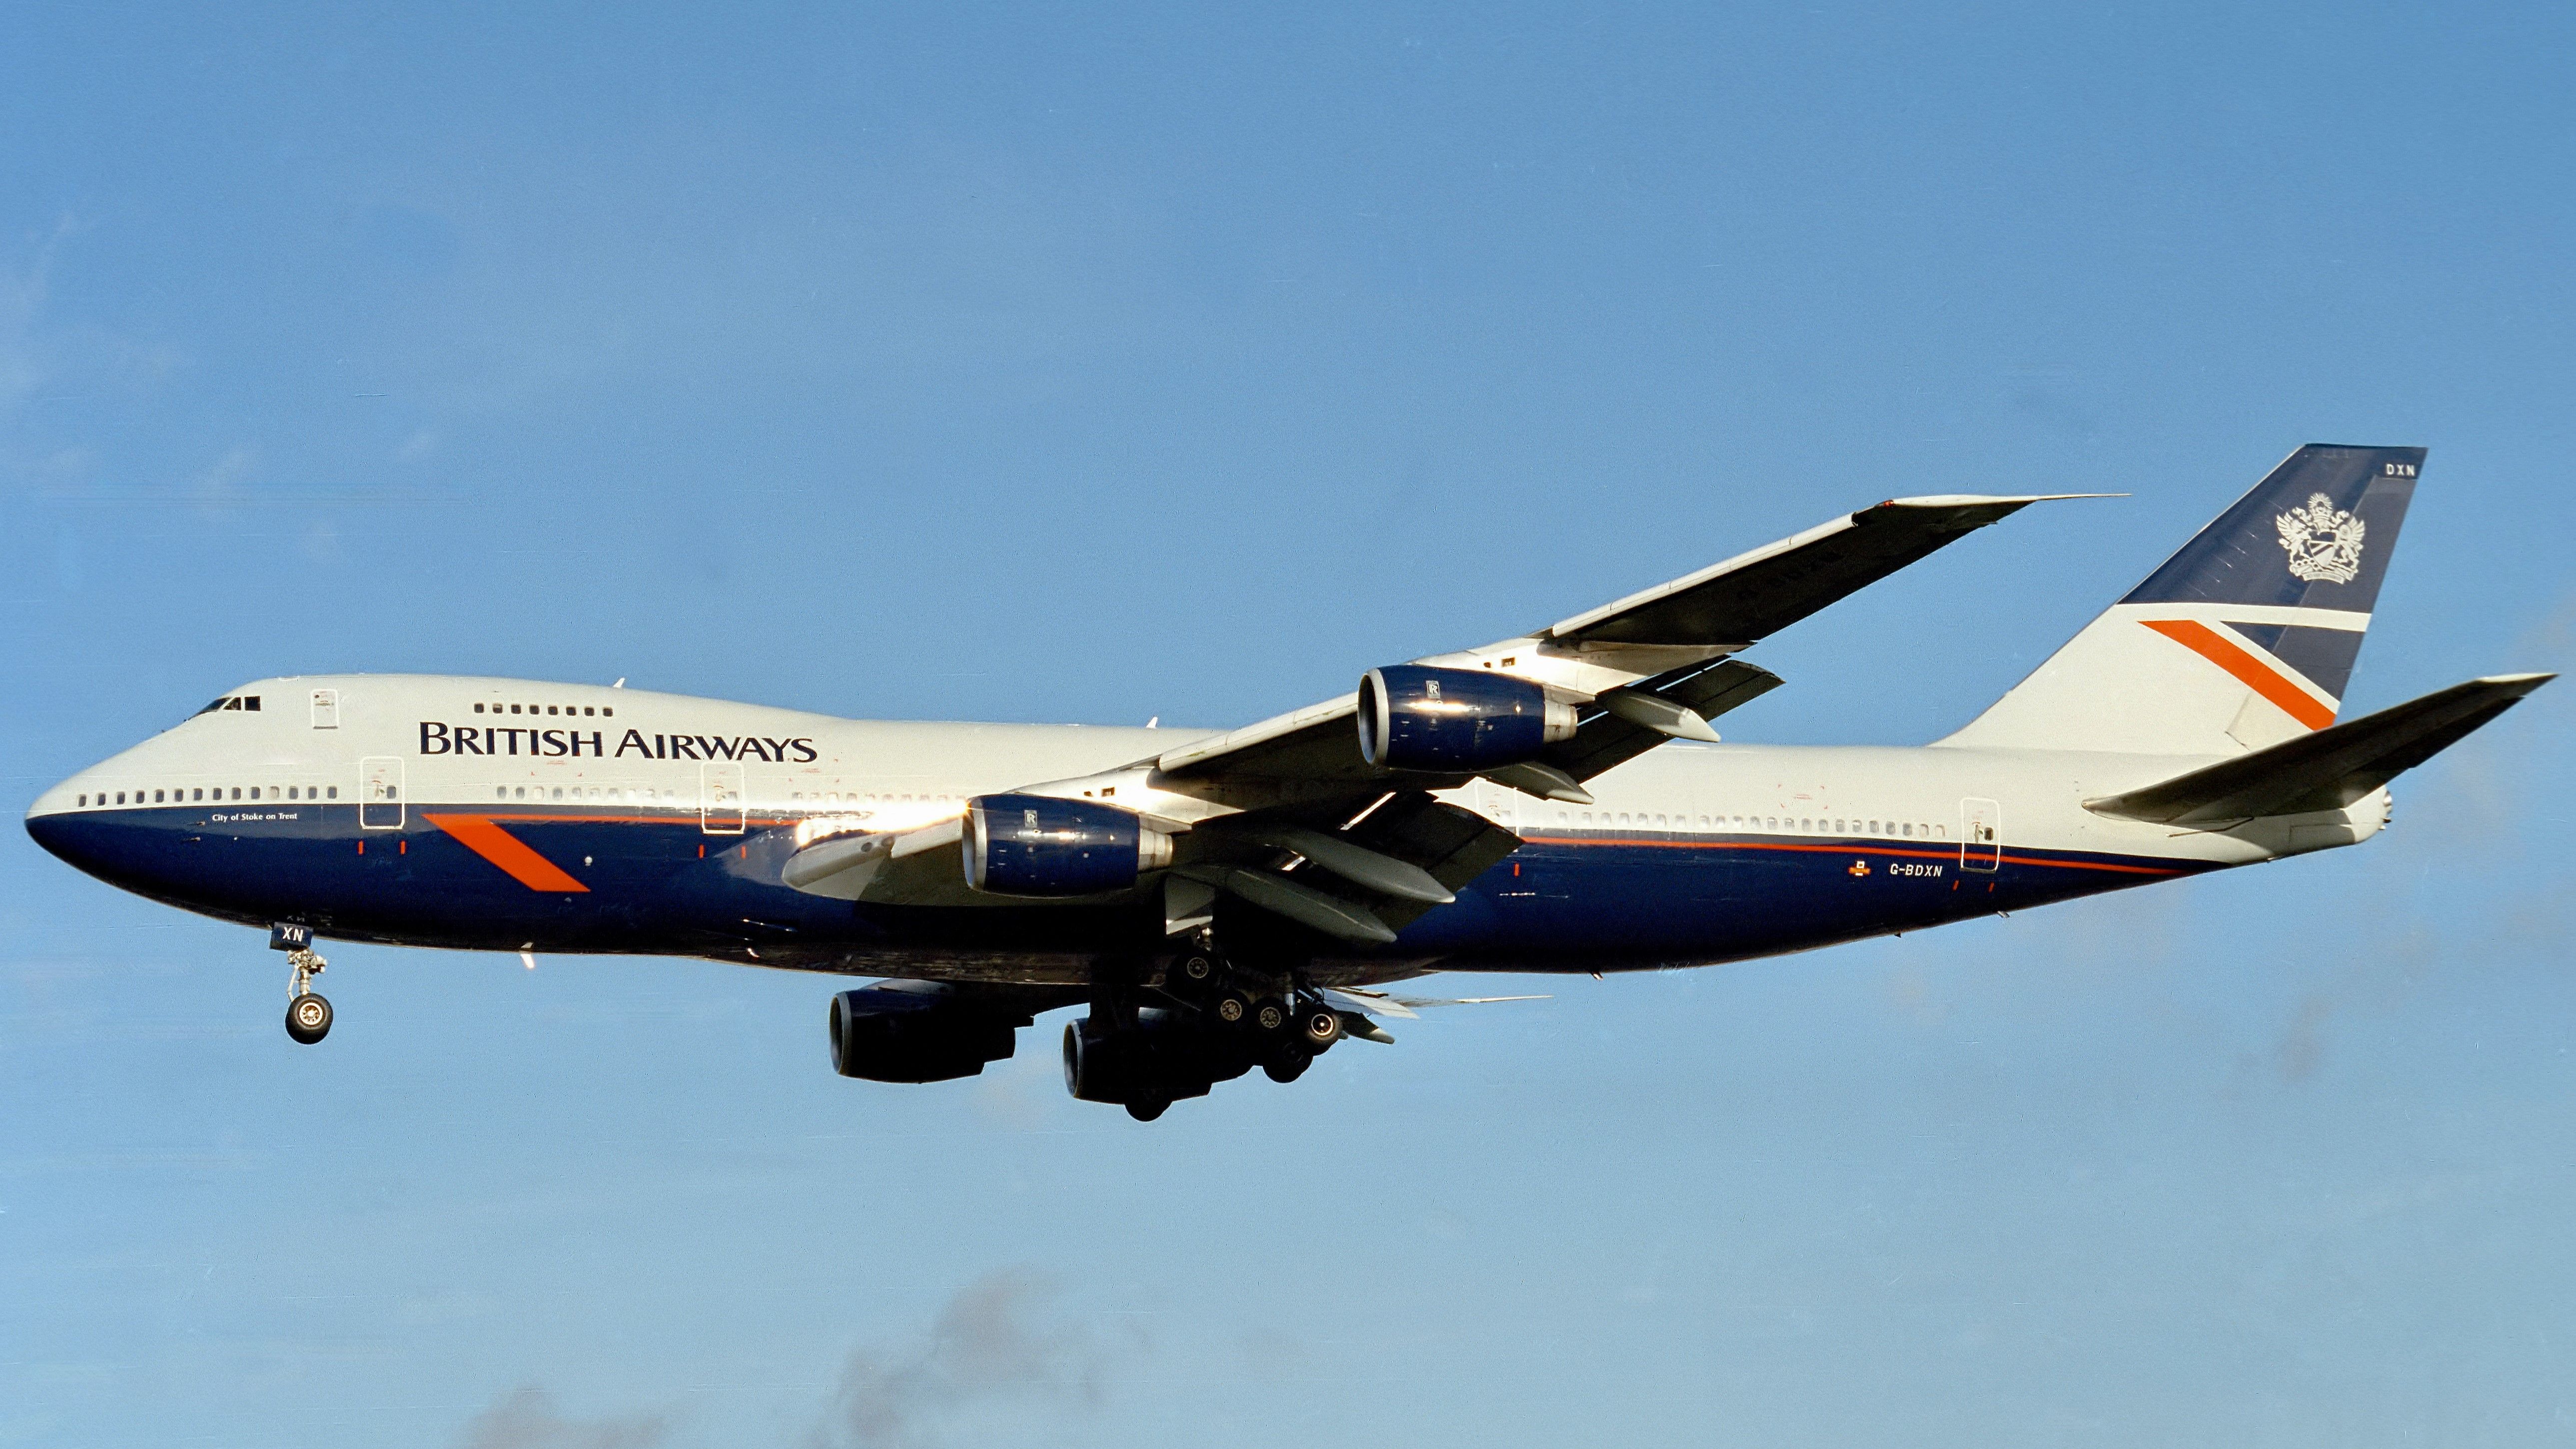 A British Airways Boeing 747 Flying in the sky.